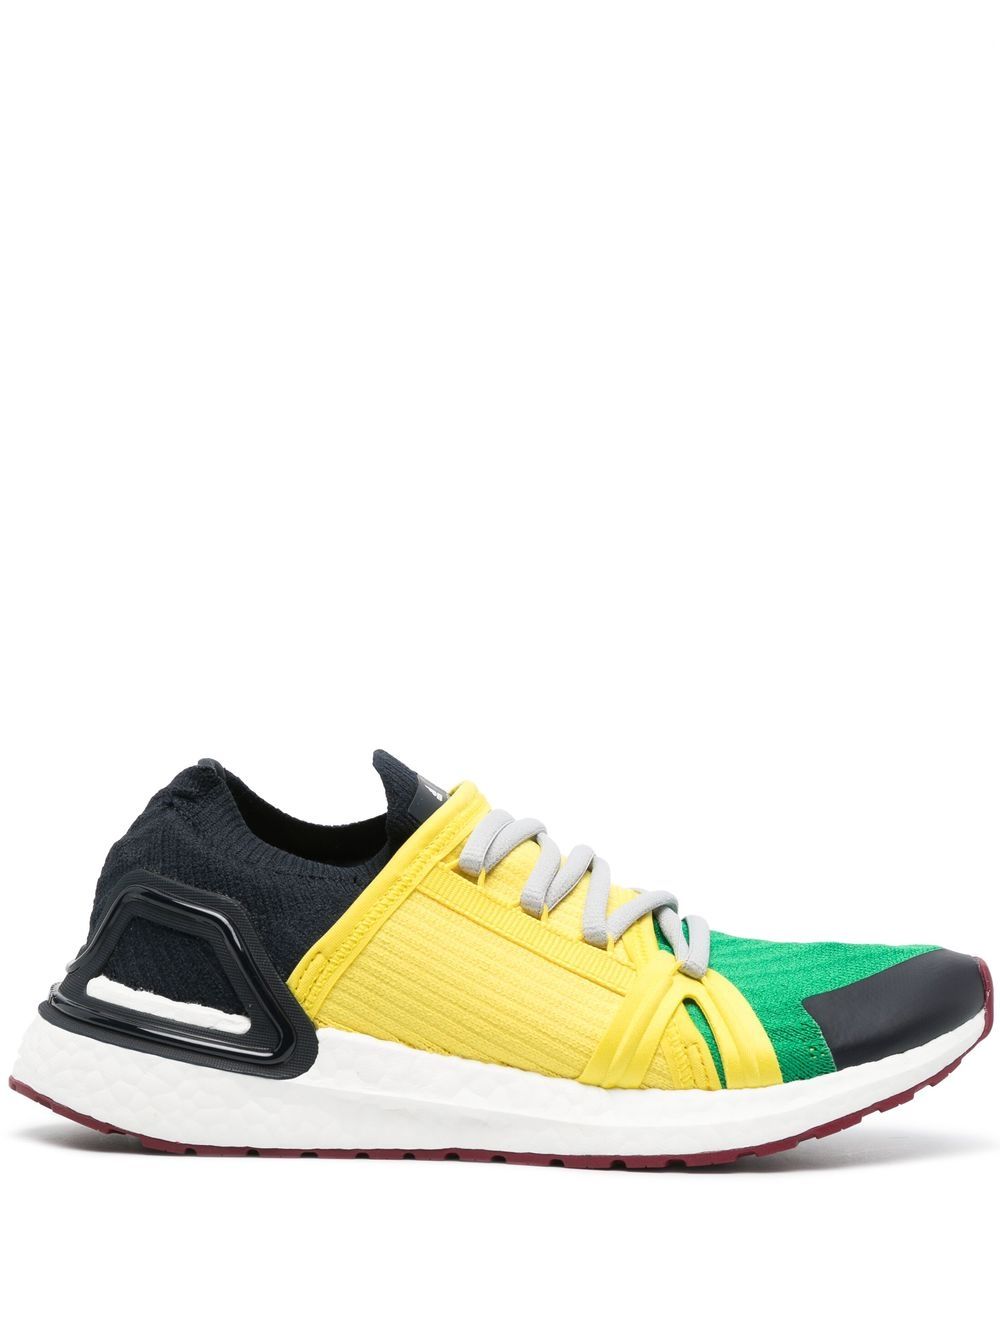 adidas by Stella McCartney colour-block running sneakers - Yellow